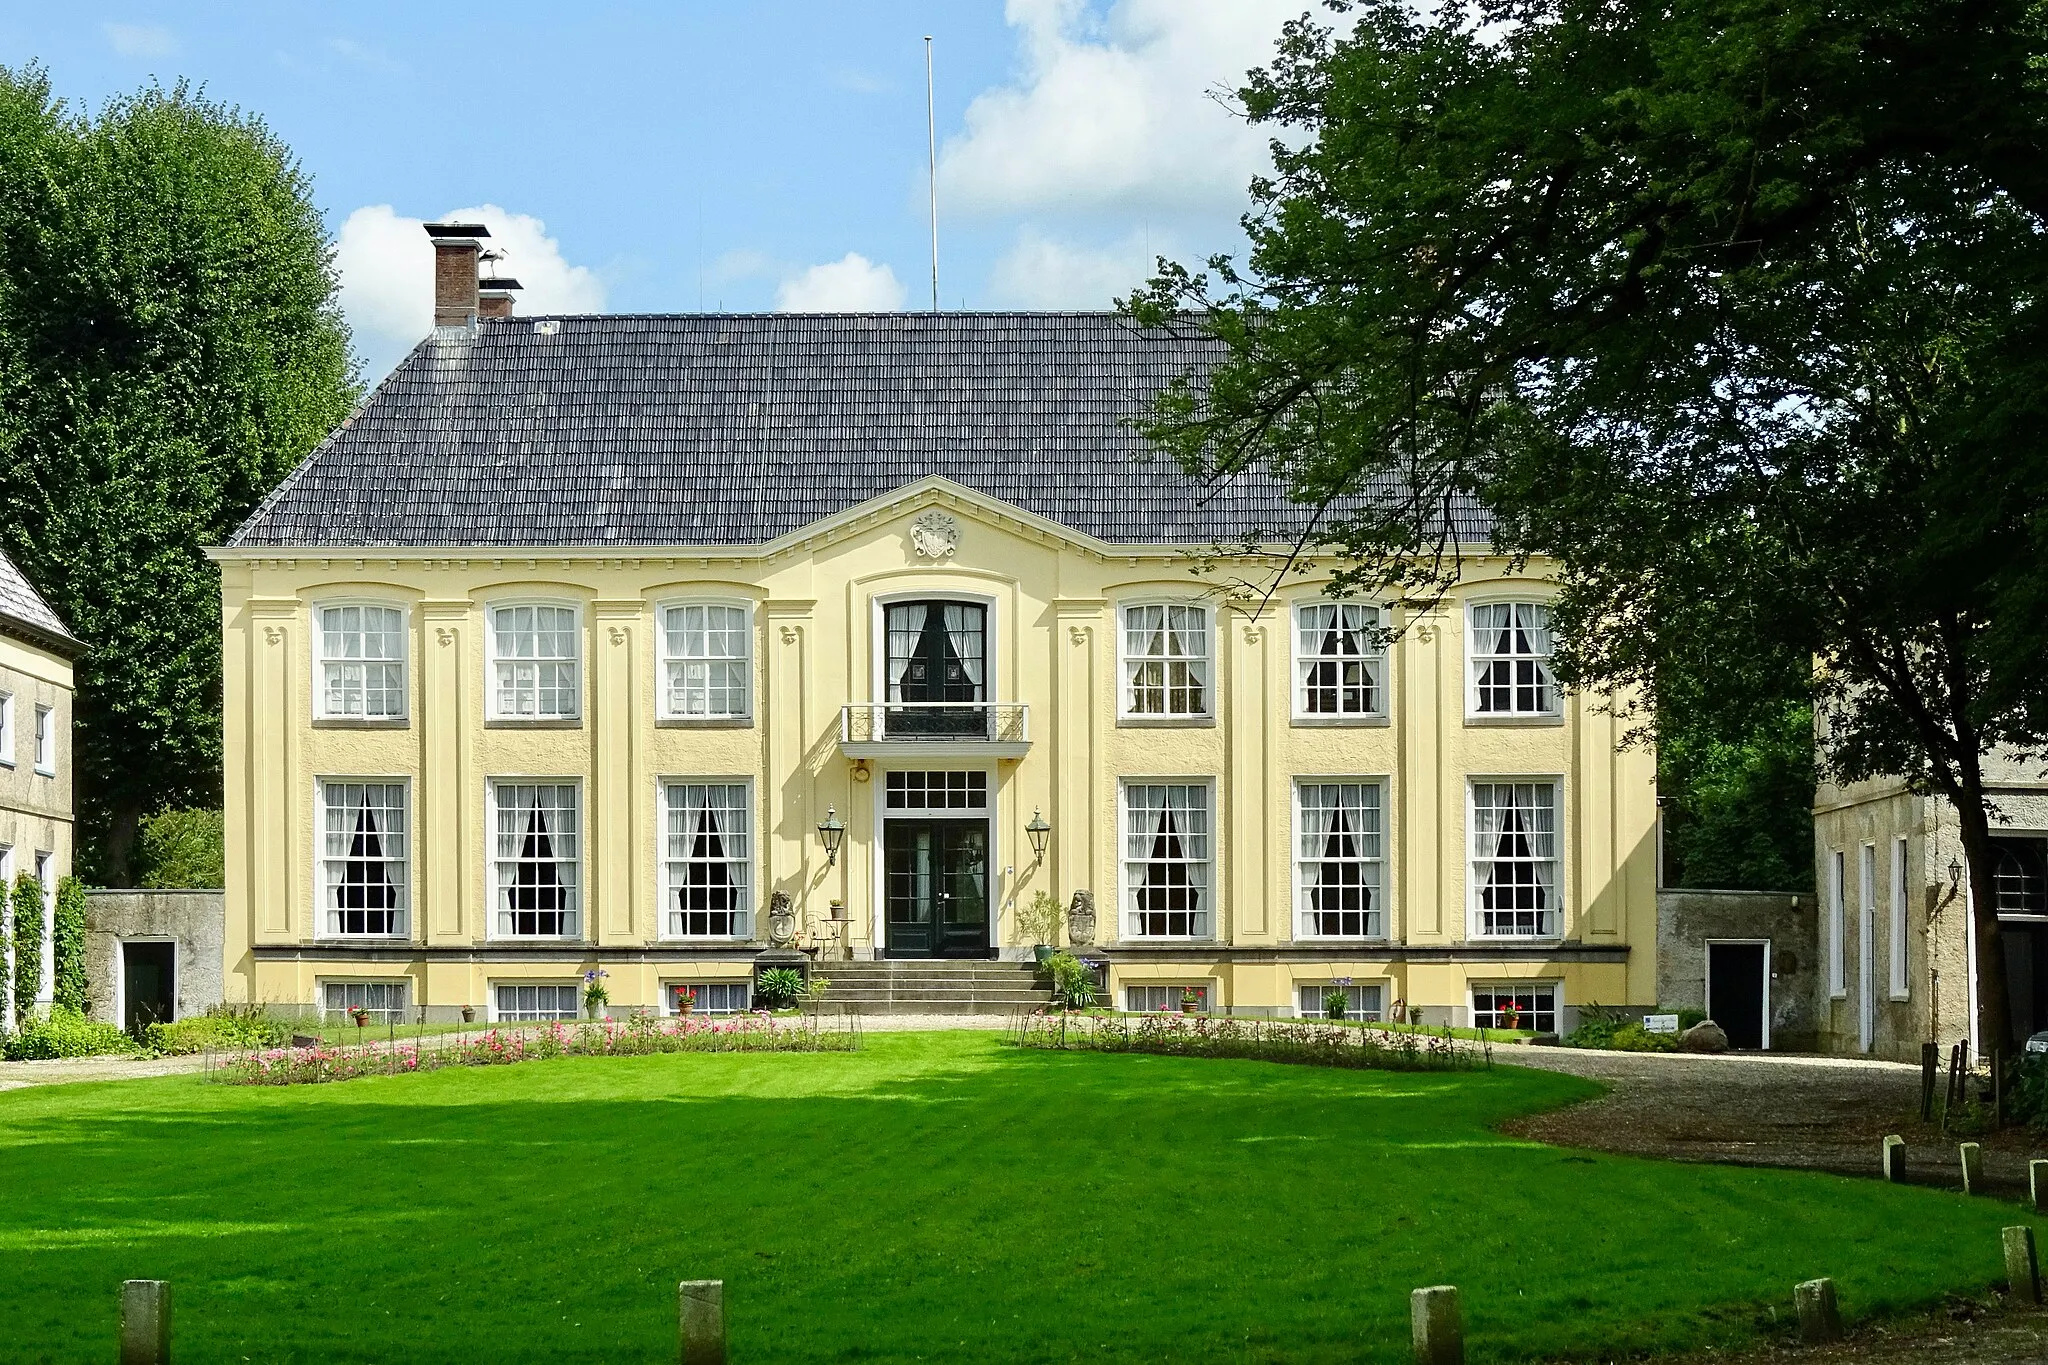 Photo showing: Fogelsanghstate in Veenklooster